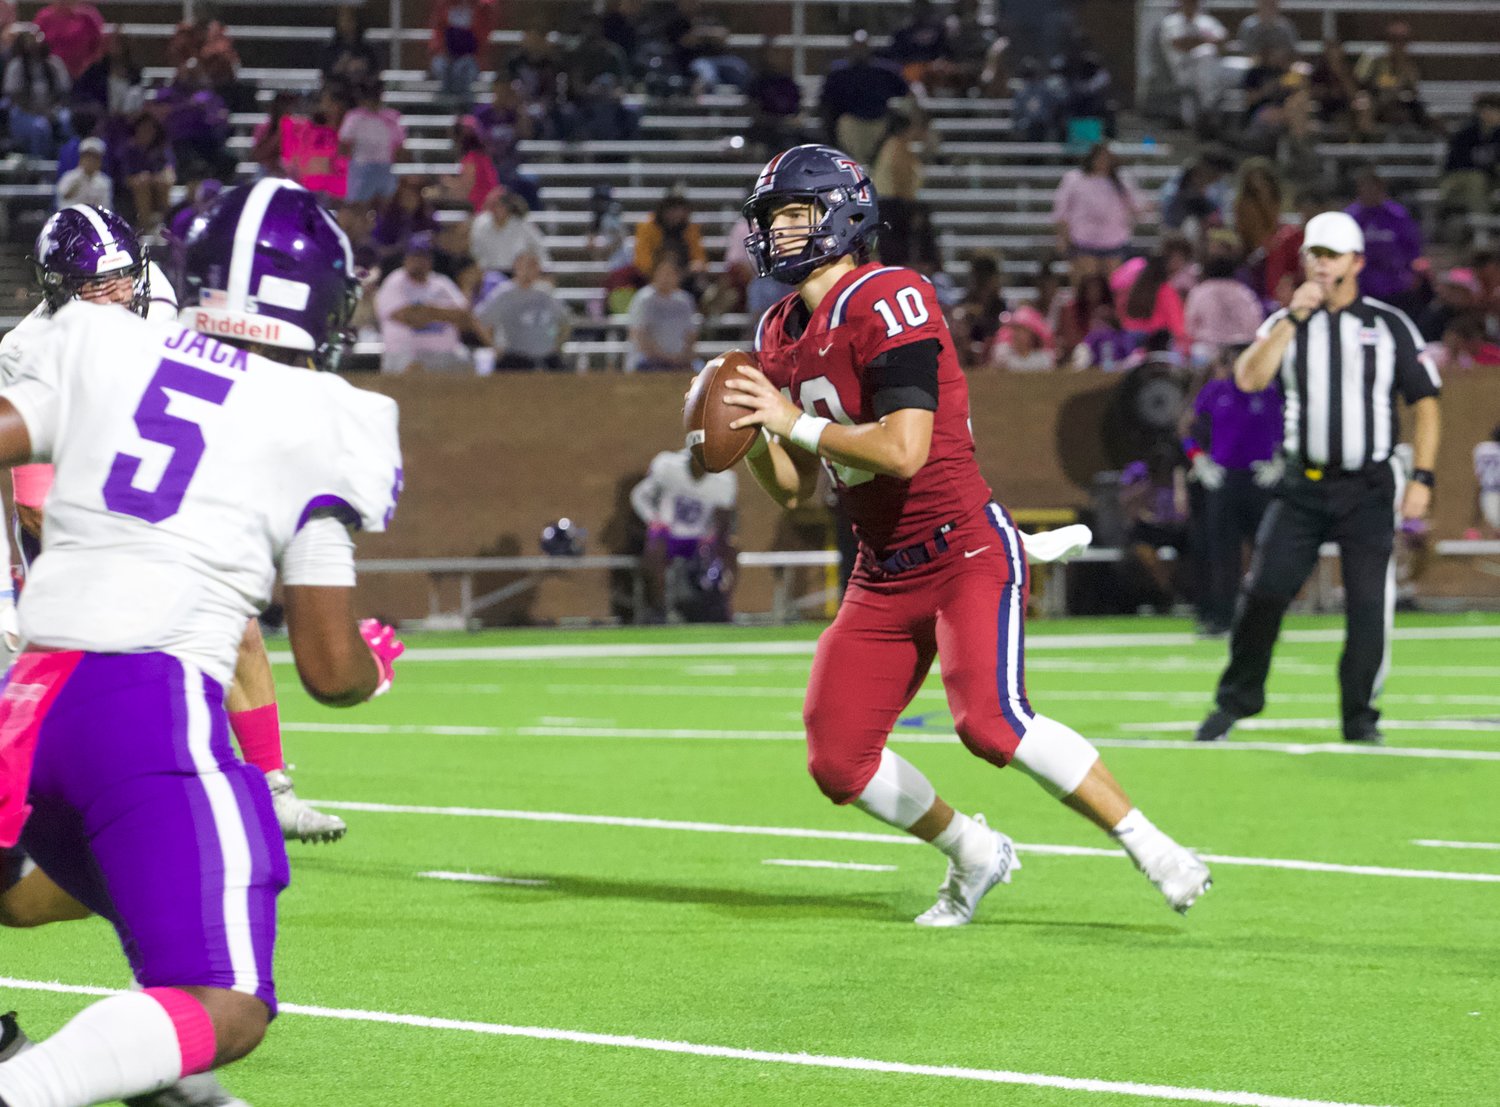 Wyatt Young looks to pass during Thursday's game between Tompkins and Morton Ranch at Rhodes Stadium.